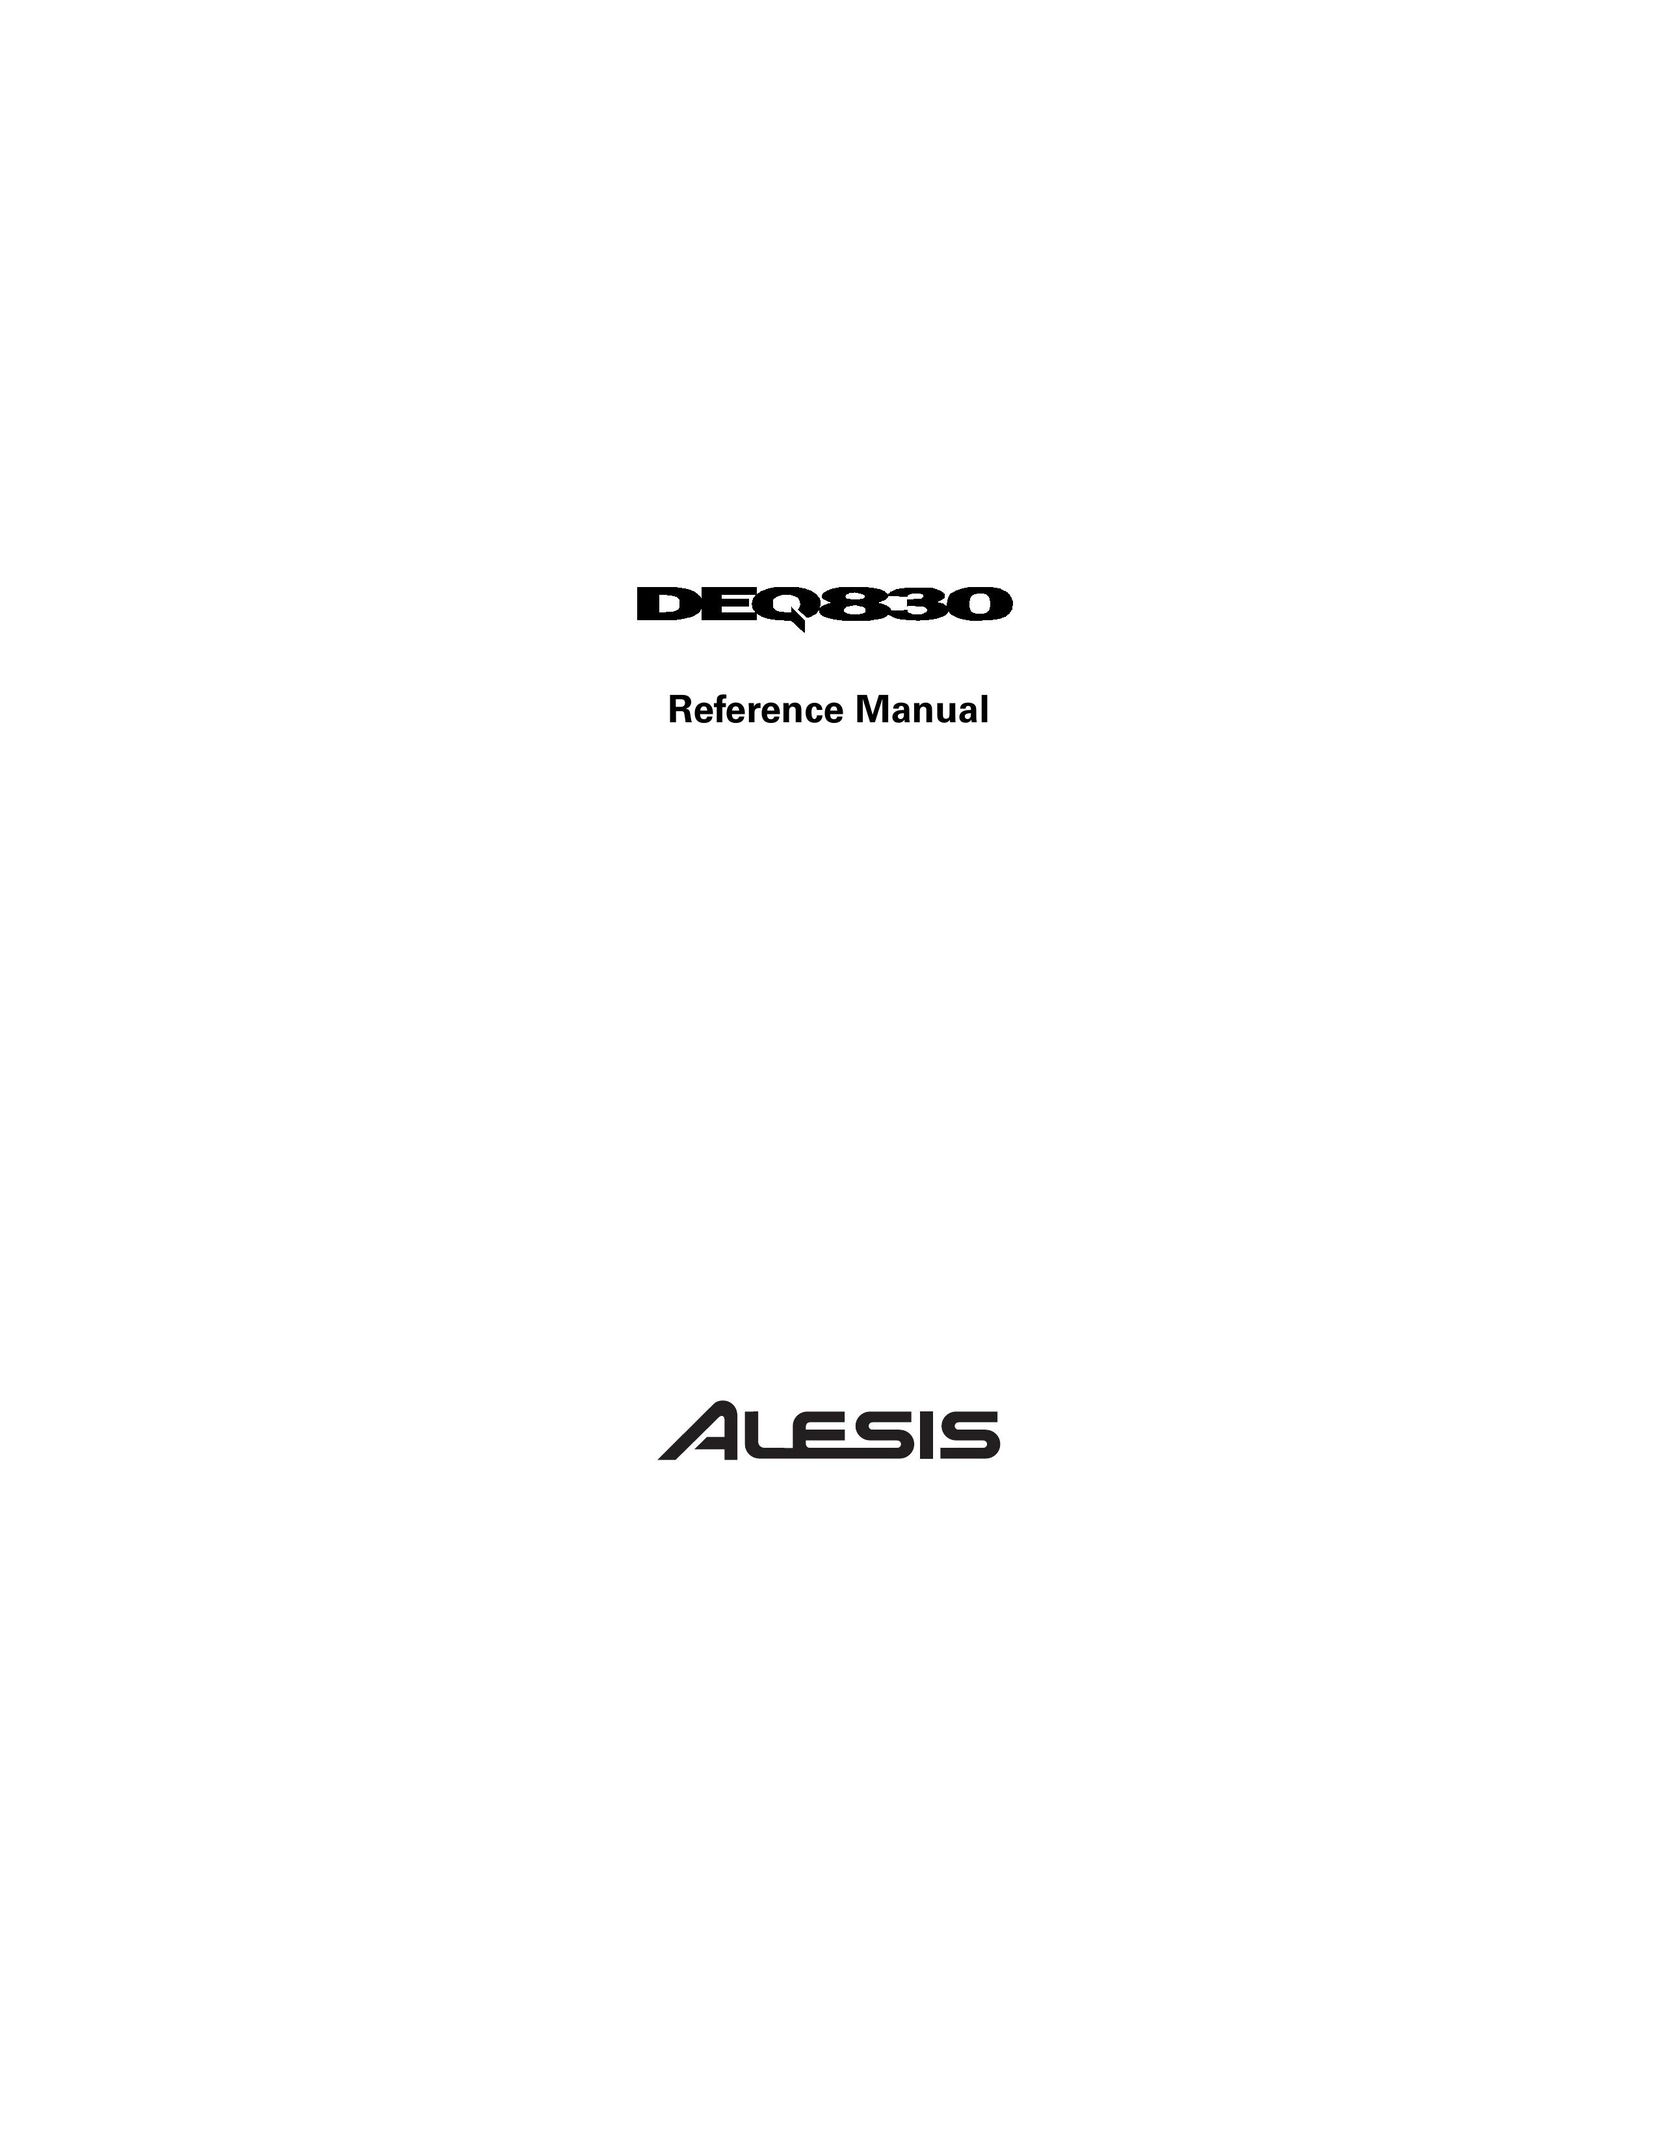 Alesis DEQ830 Stereo Equalizer User Manual